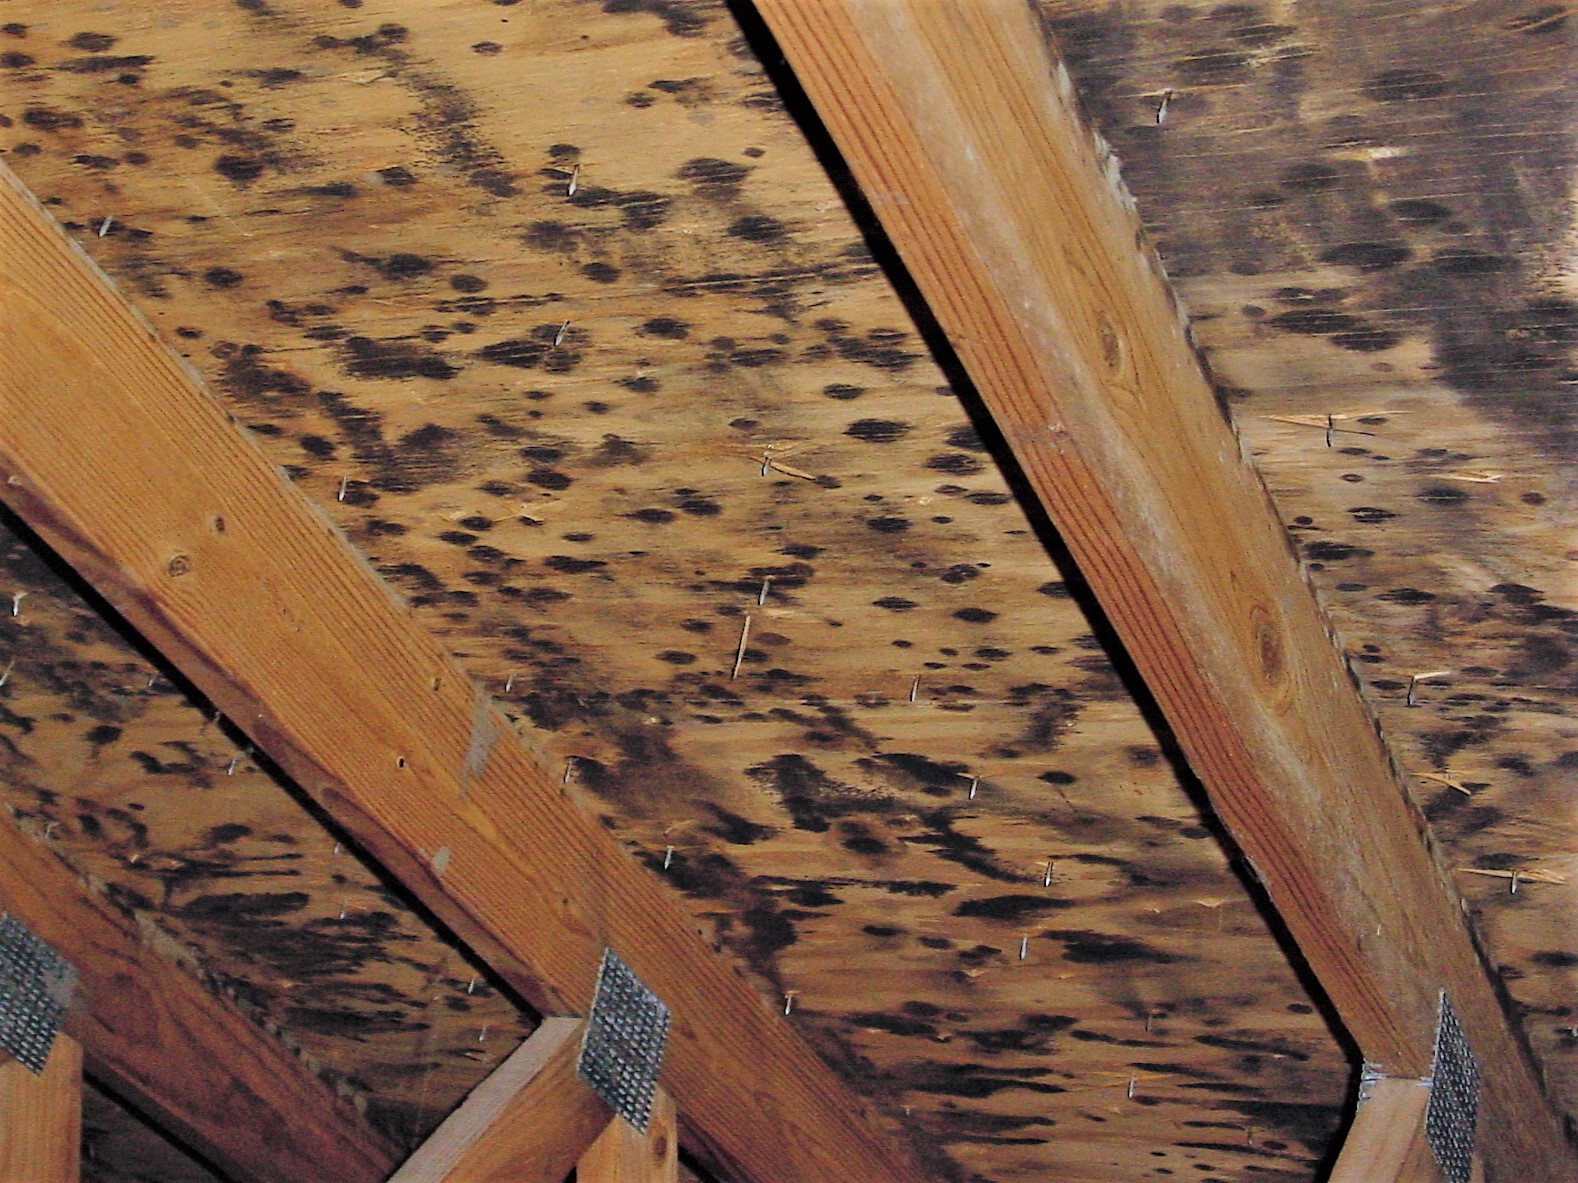 mold spots in roof